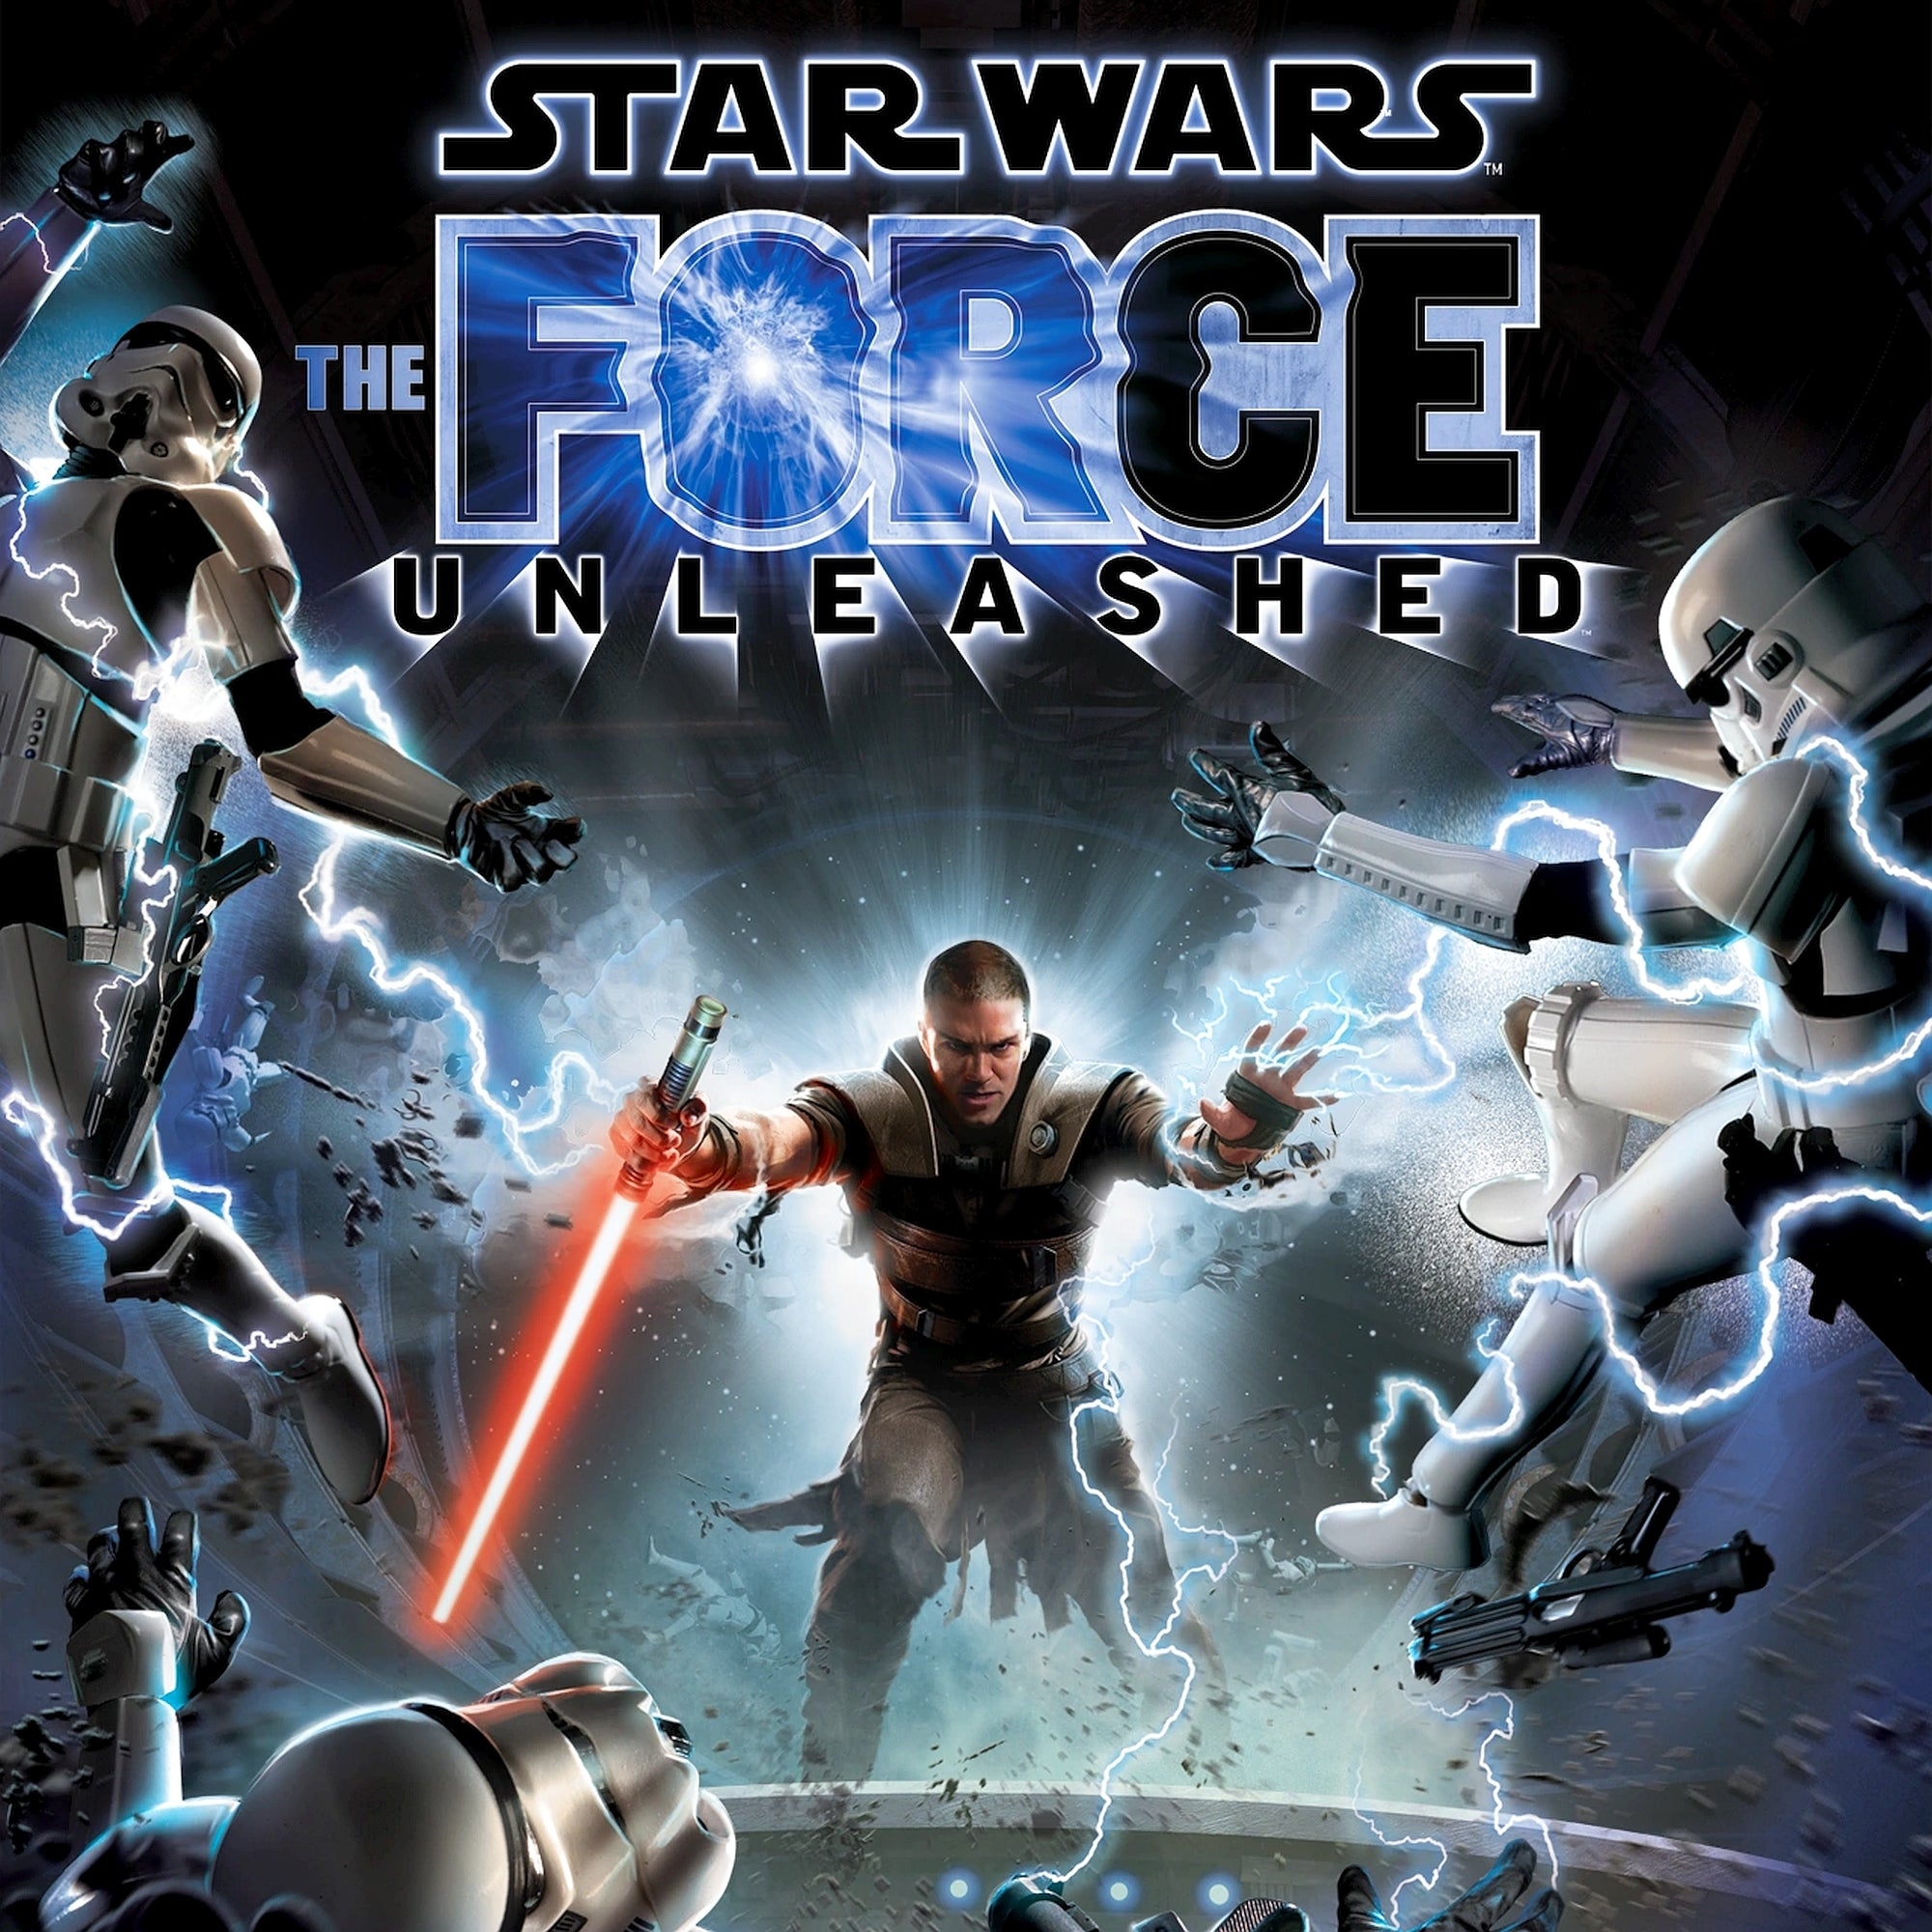 Игра star wars the force unleashed. Звёздные войны the Force unleashed. Звёздные войны the Force unleashed 1. Стар ВАРС the Force unleashed 1. Star Wars the Force unleashed ps4.